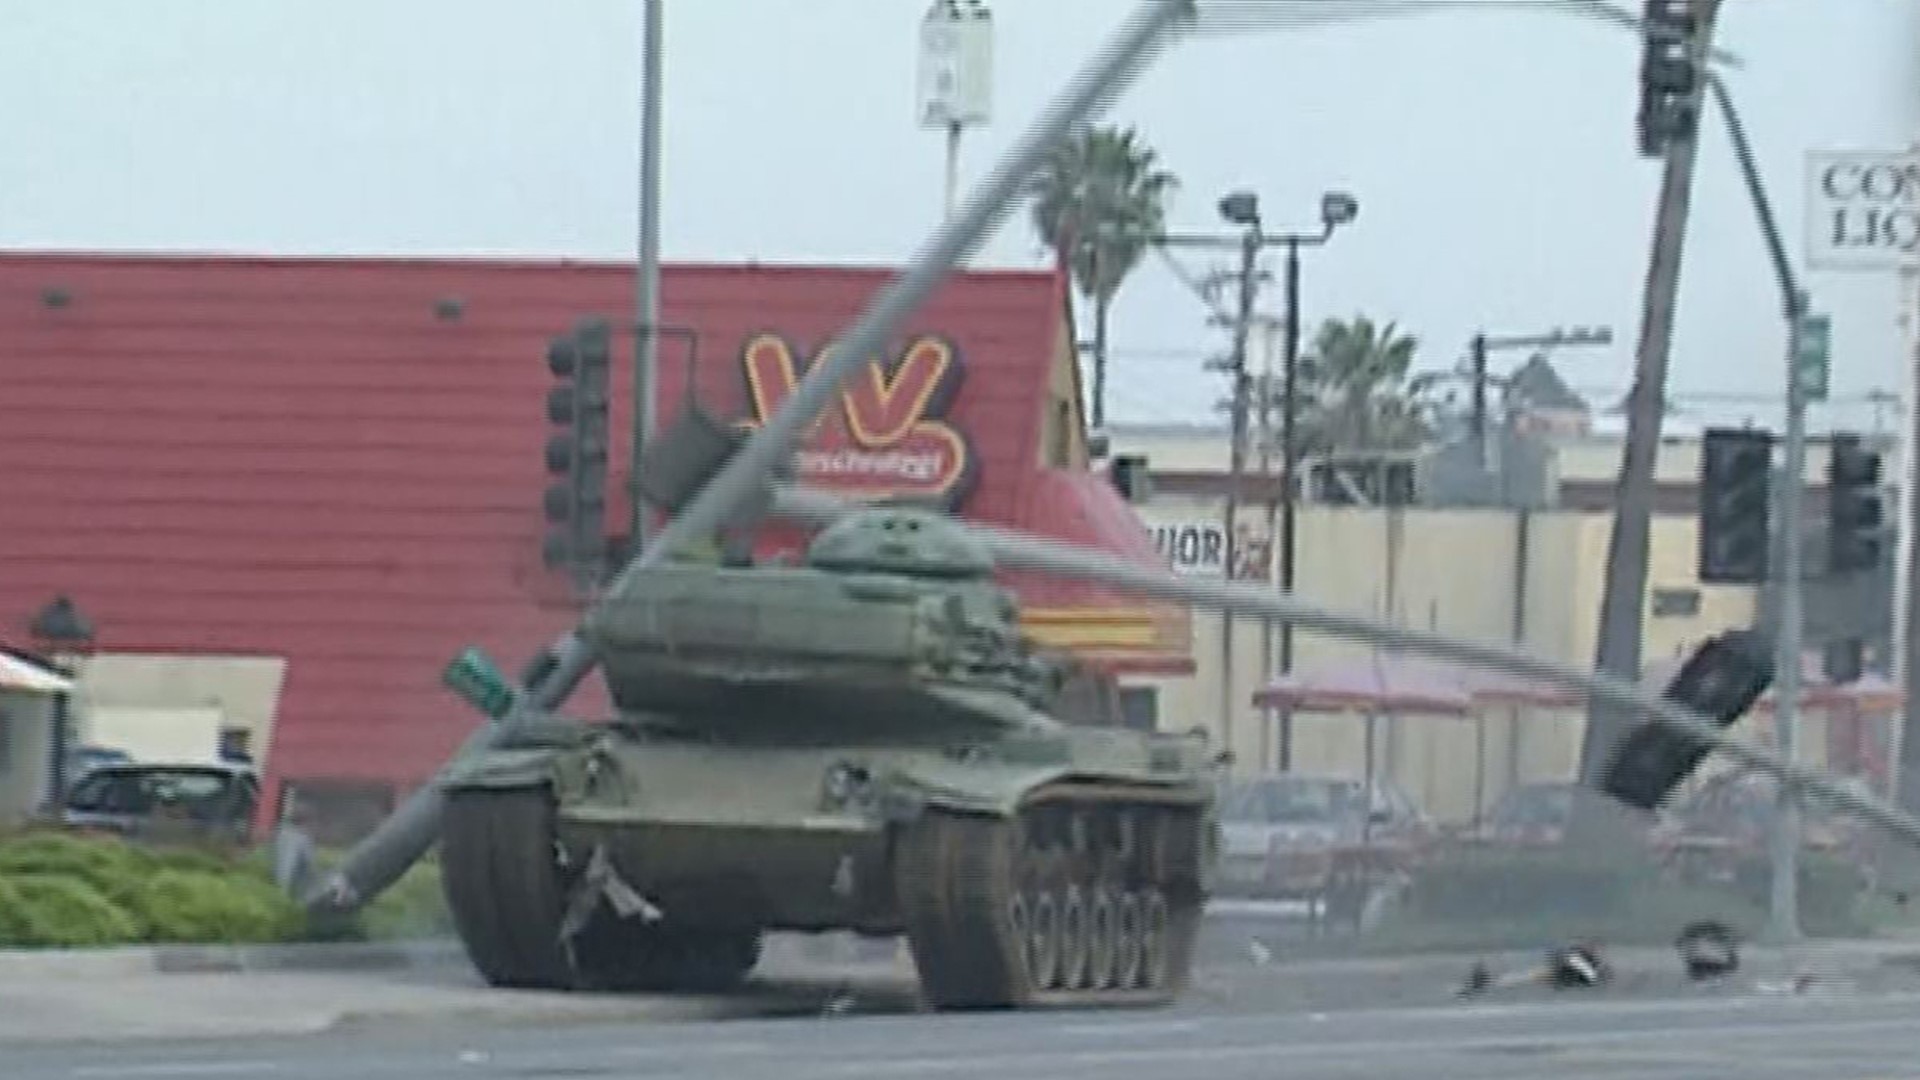 The day a man stole an army tank and took it on a violent rampage.